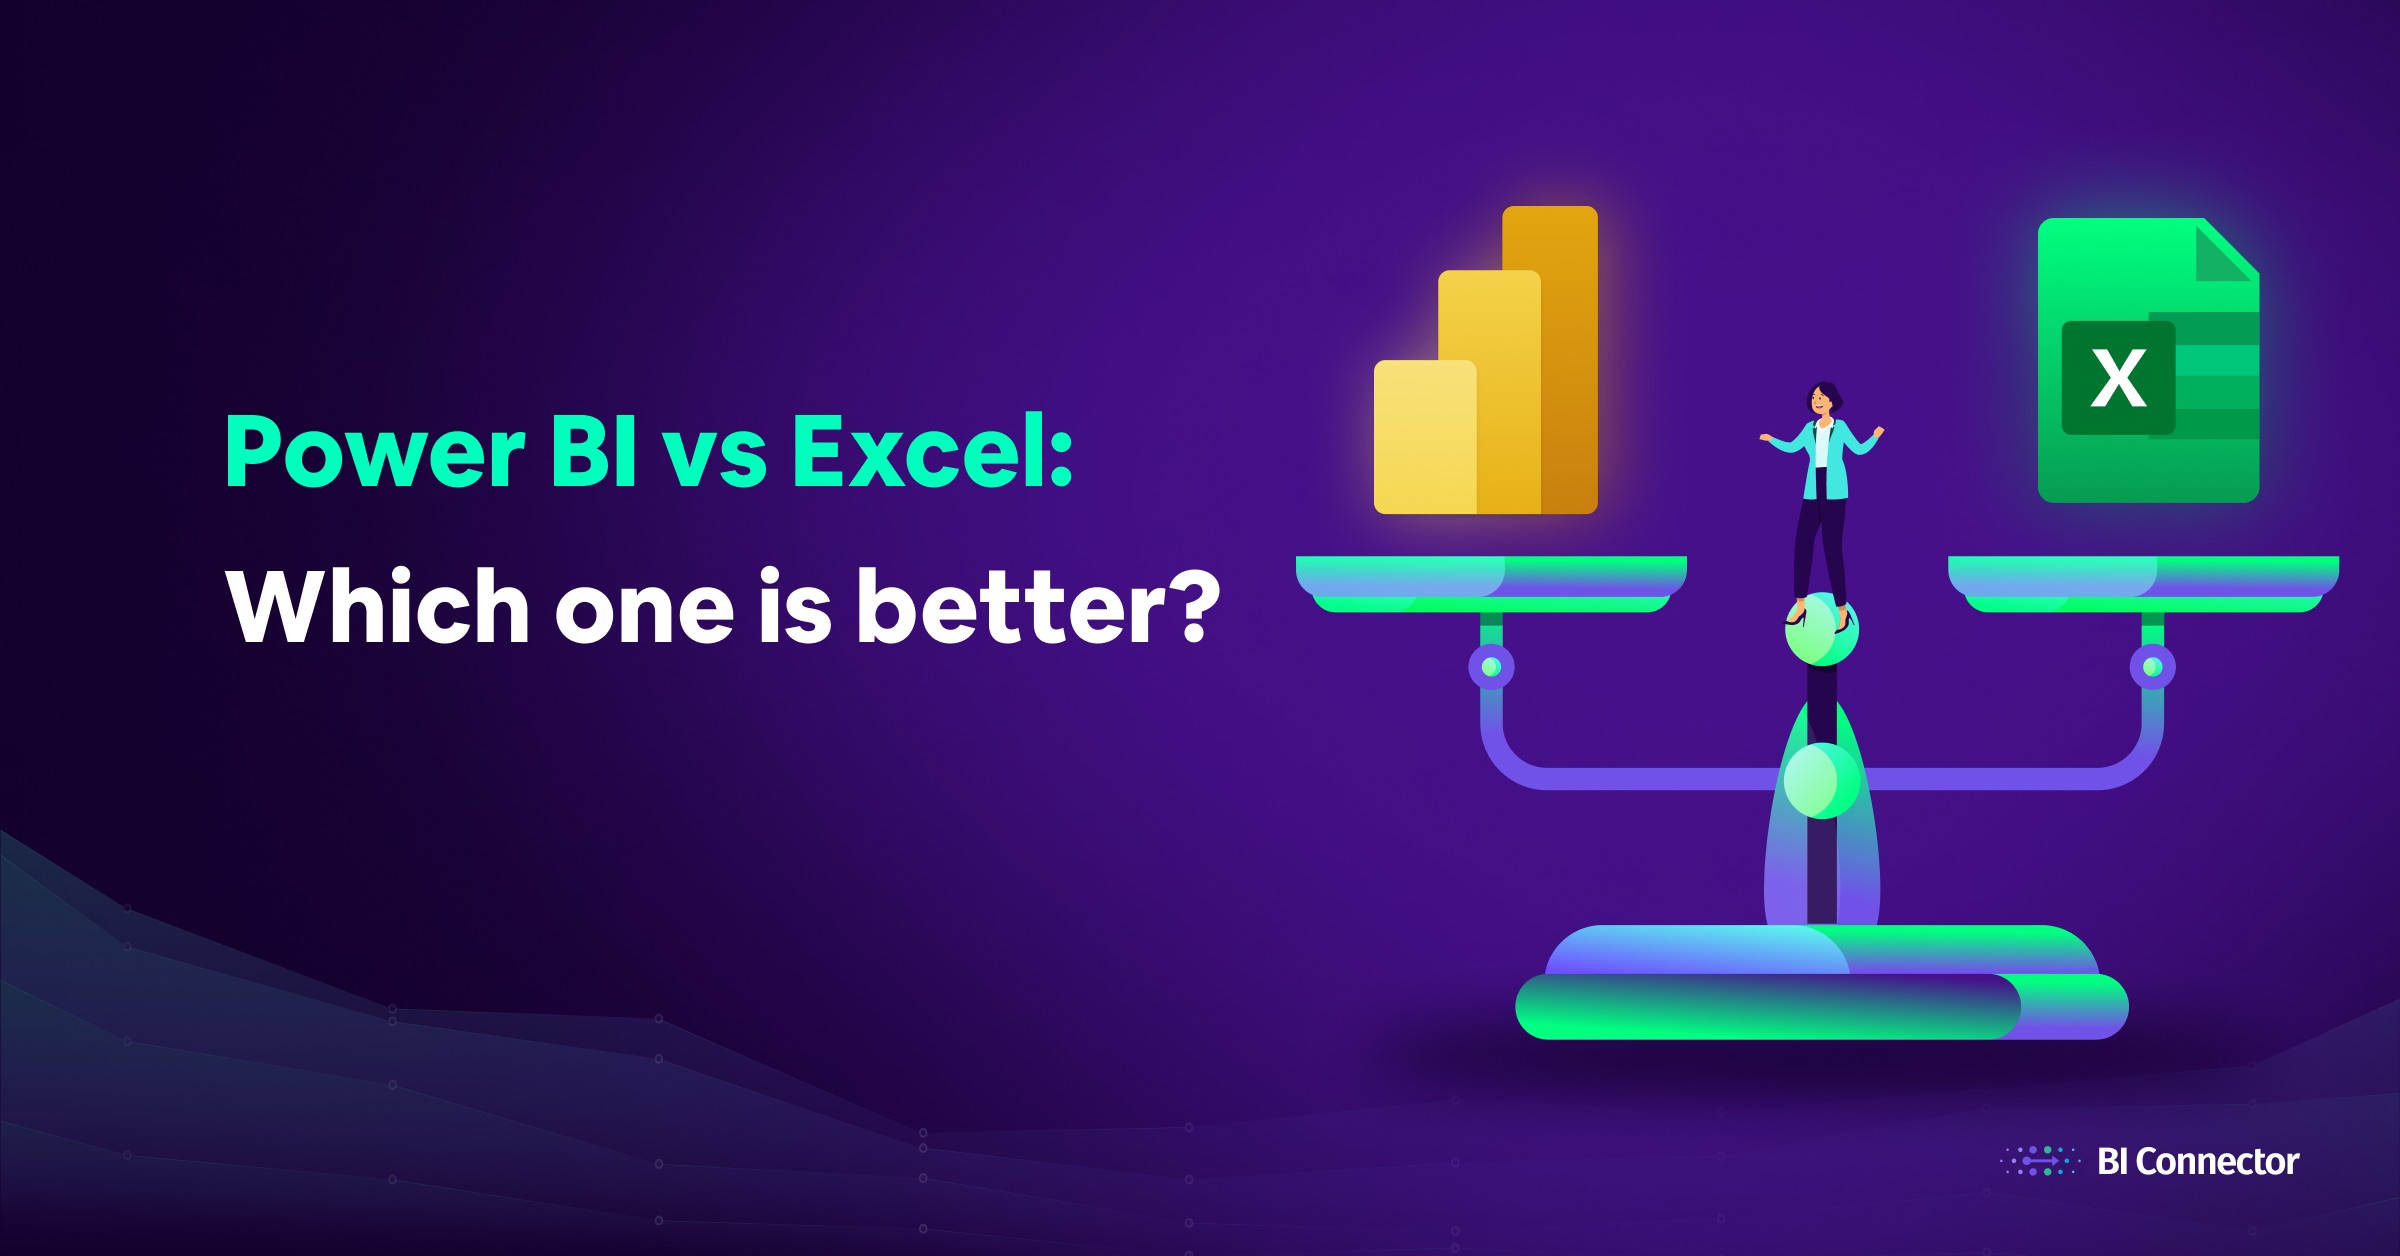 Power BI vs Excel: Which tool is better